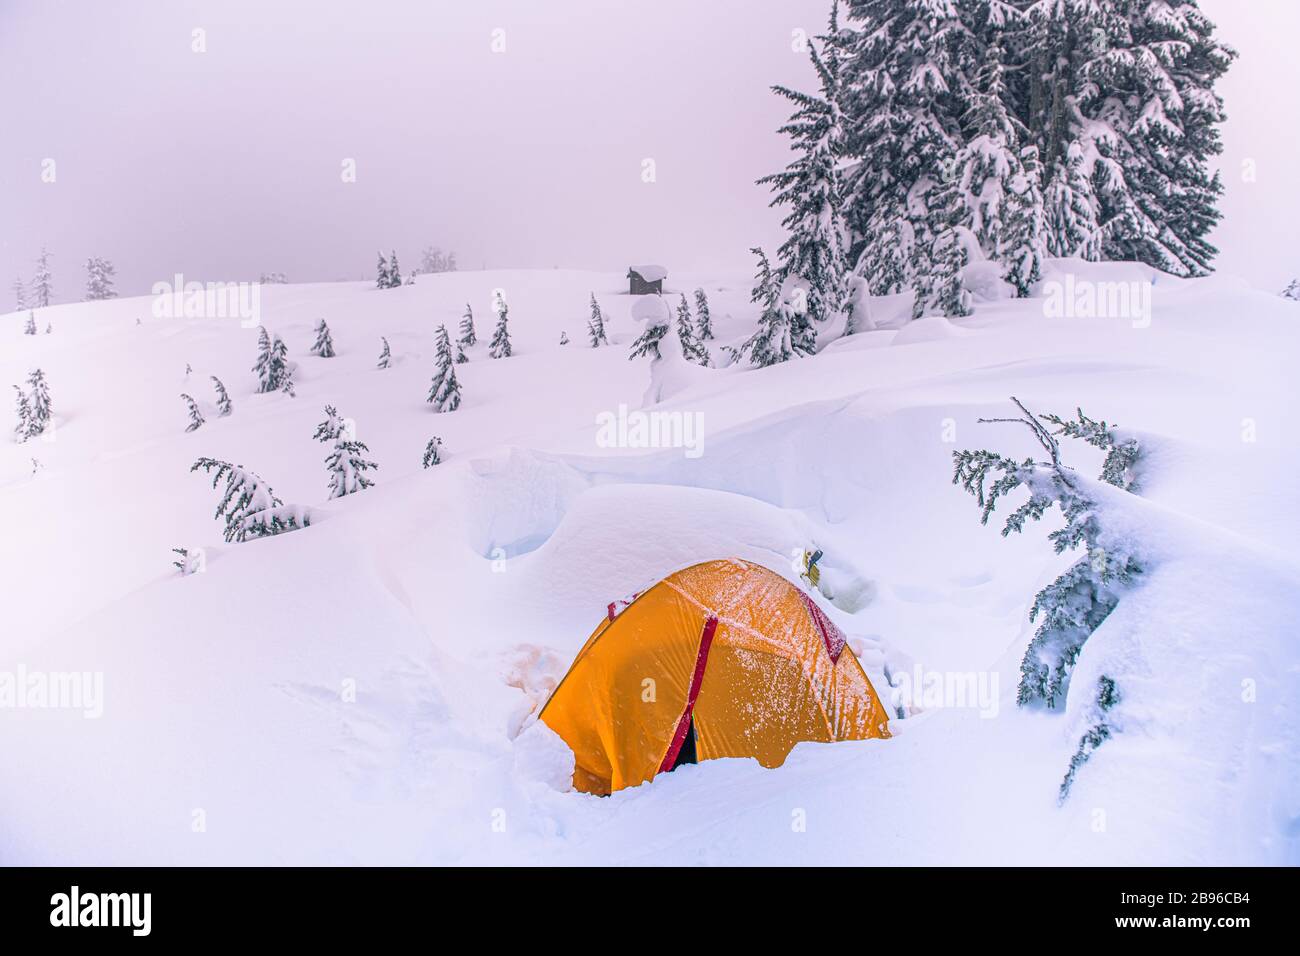 High angle view of orange tent pitched in a wintry landscape. Stock Photo